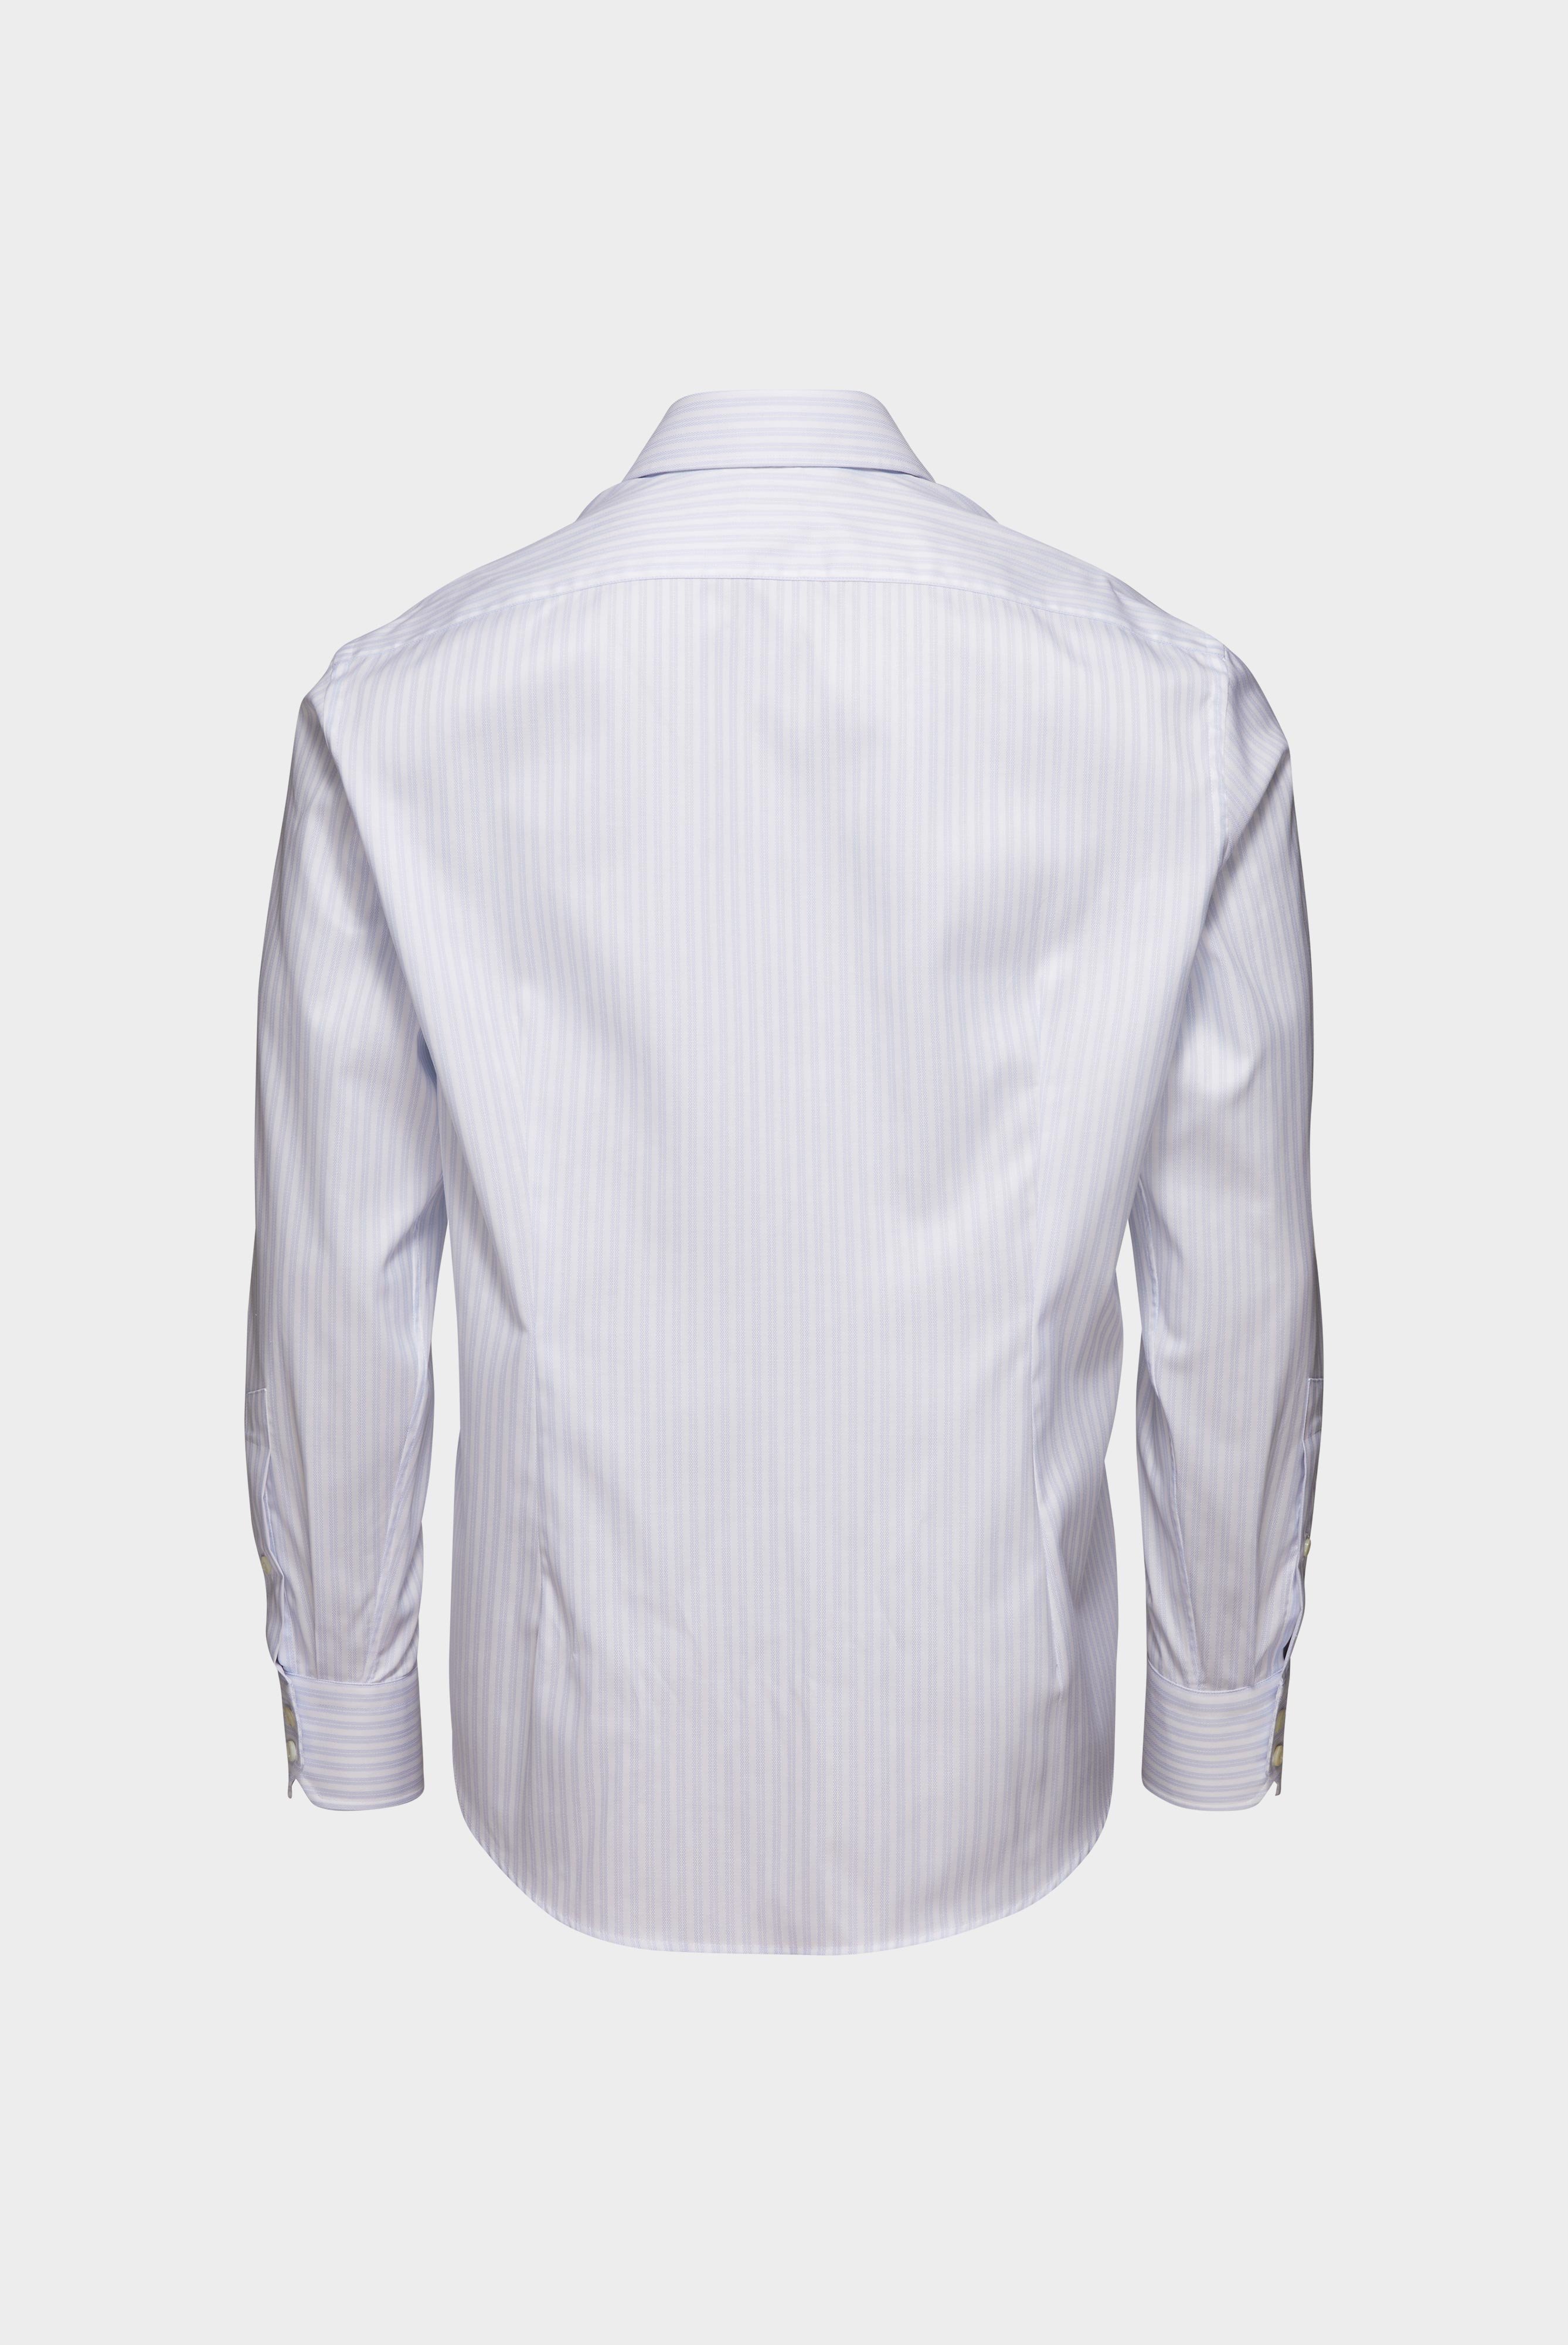 Easy Iron Shirts+Striped Wrinkle Free Shirt Tailor Fit+20.2020.BQ.161106.007.38